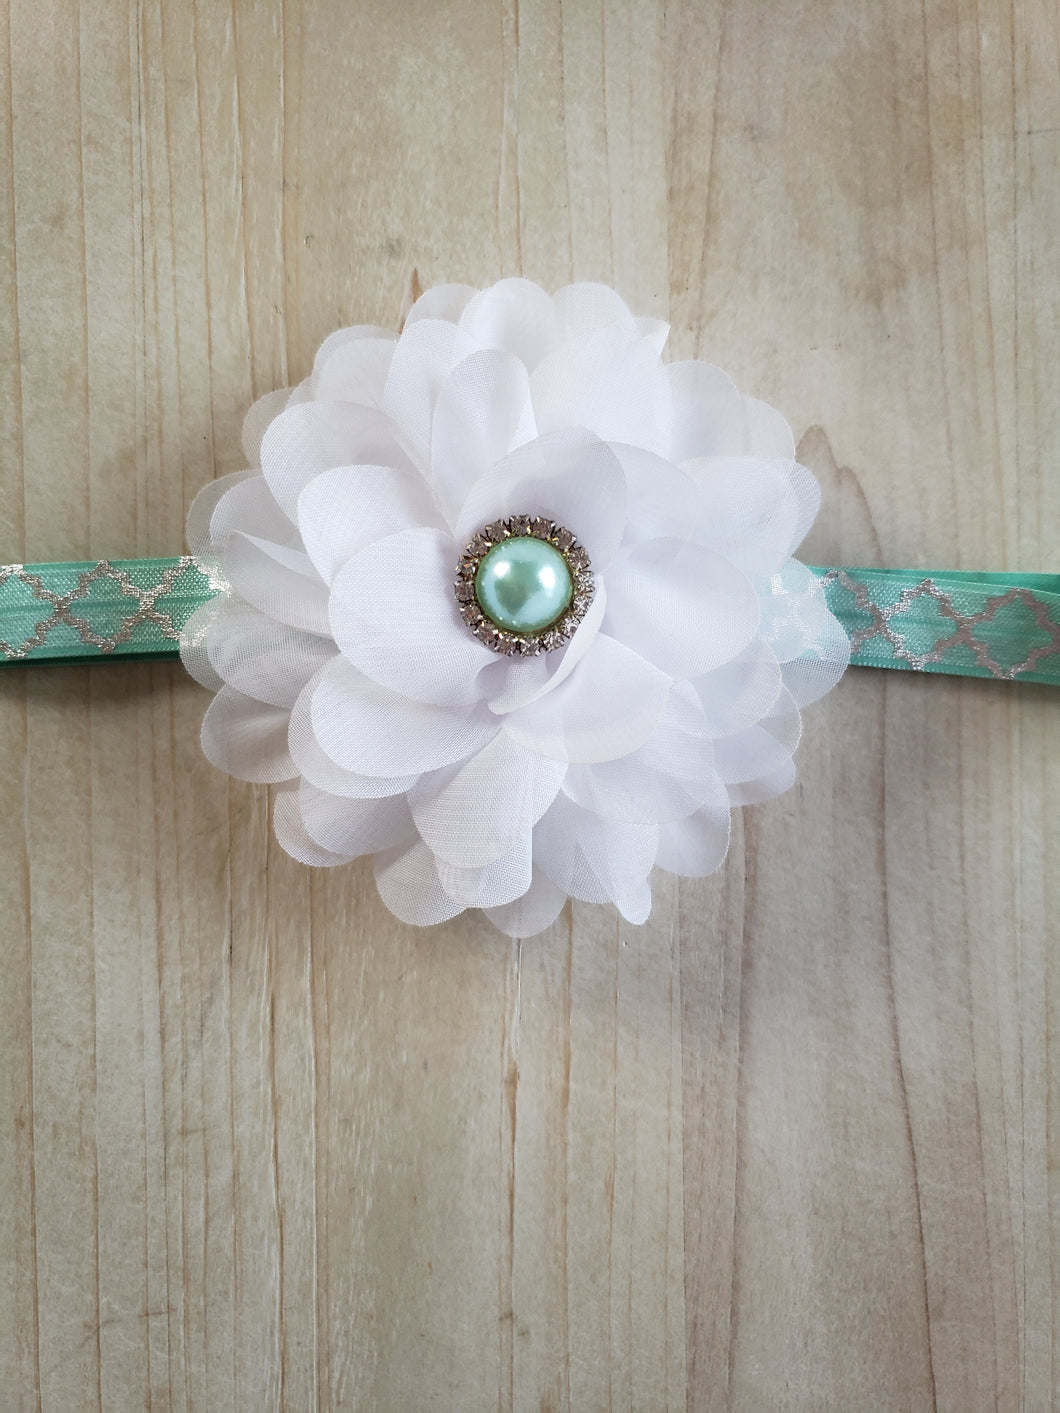 Teal Large White Floral Headband